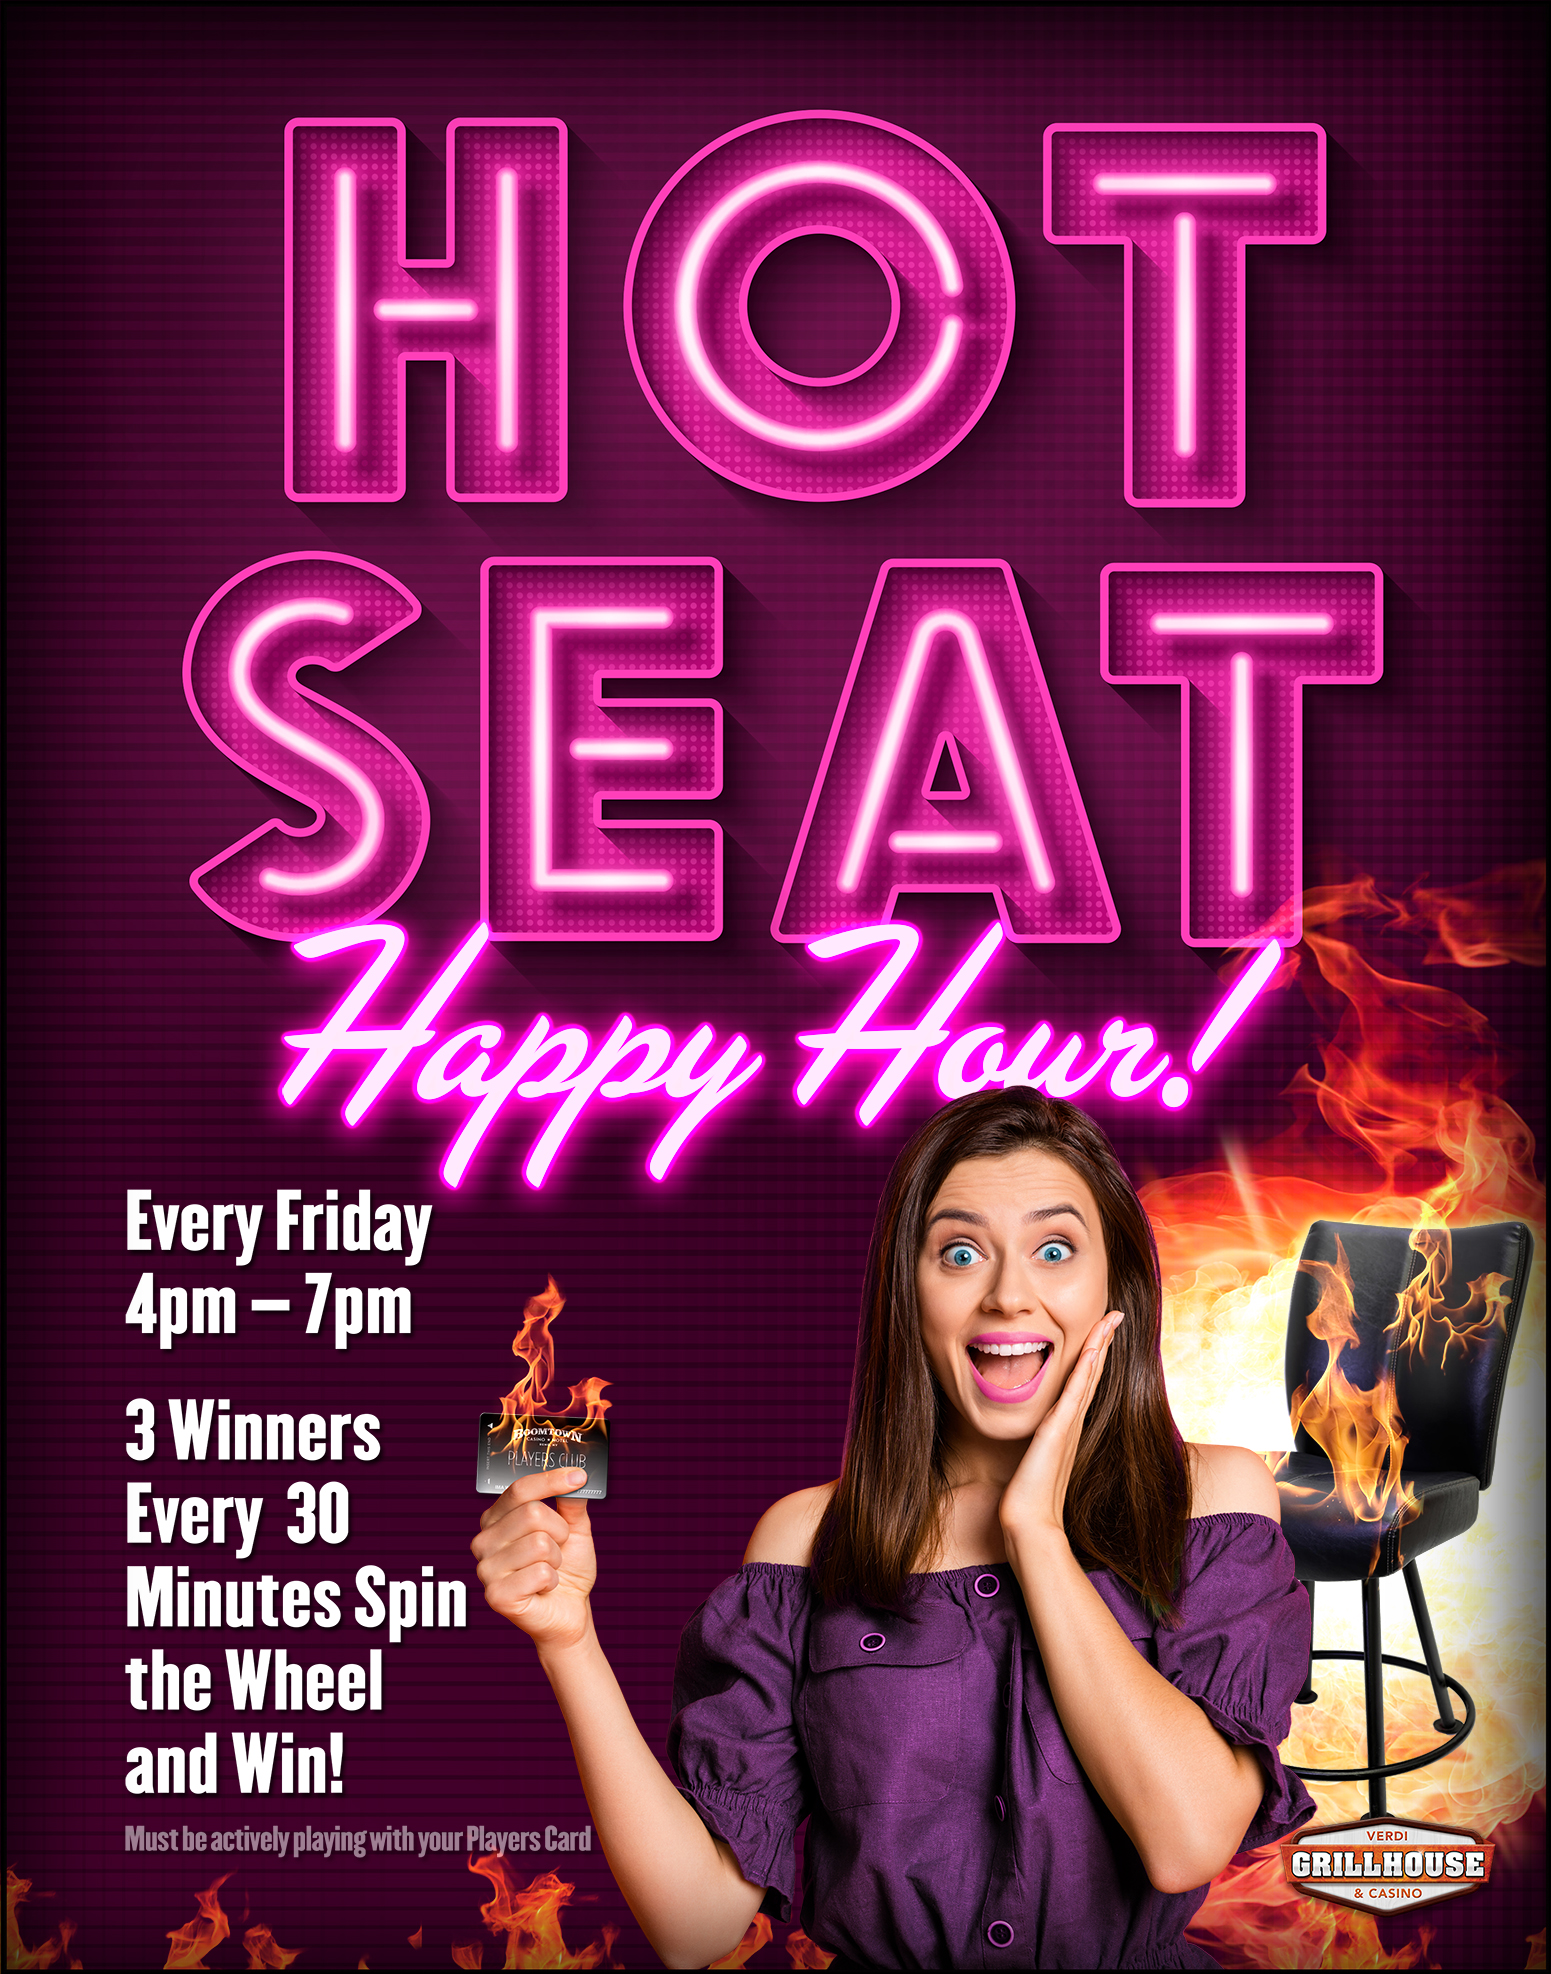 GH23-0143 VGC Hot Seat Happy Hour Poster web